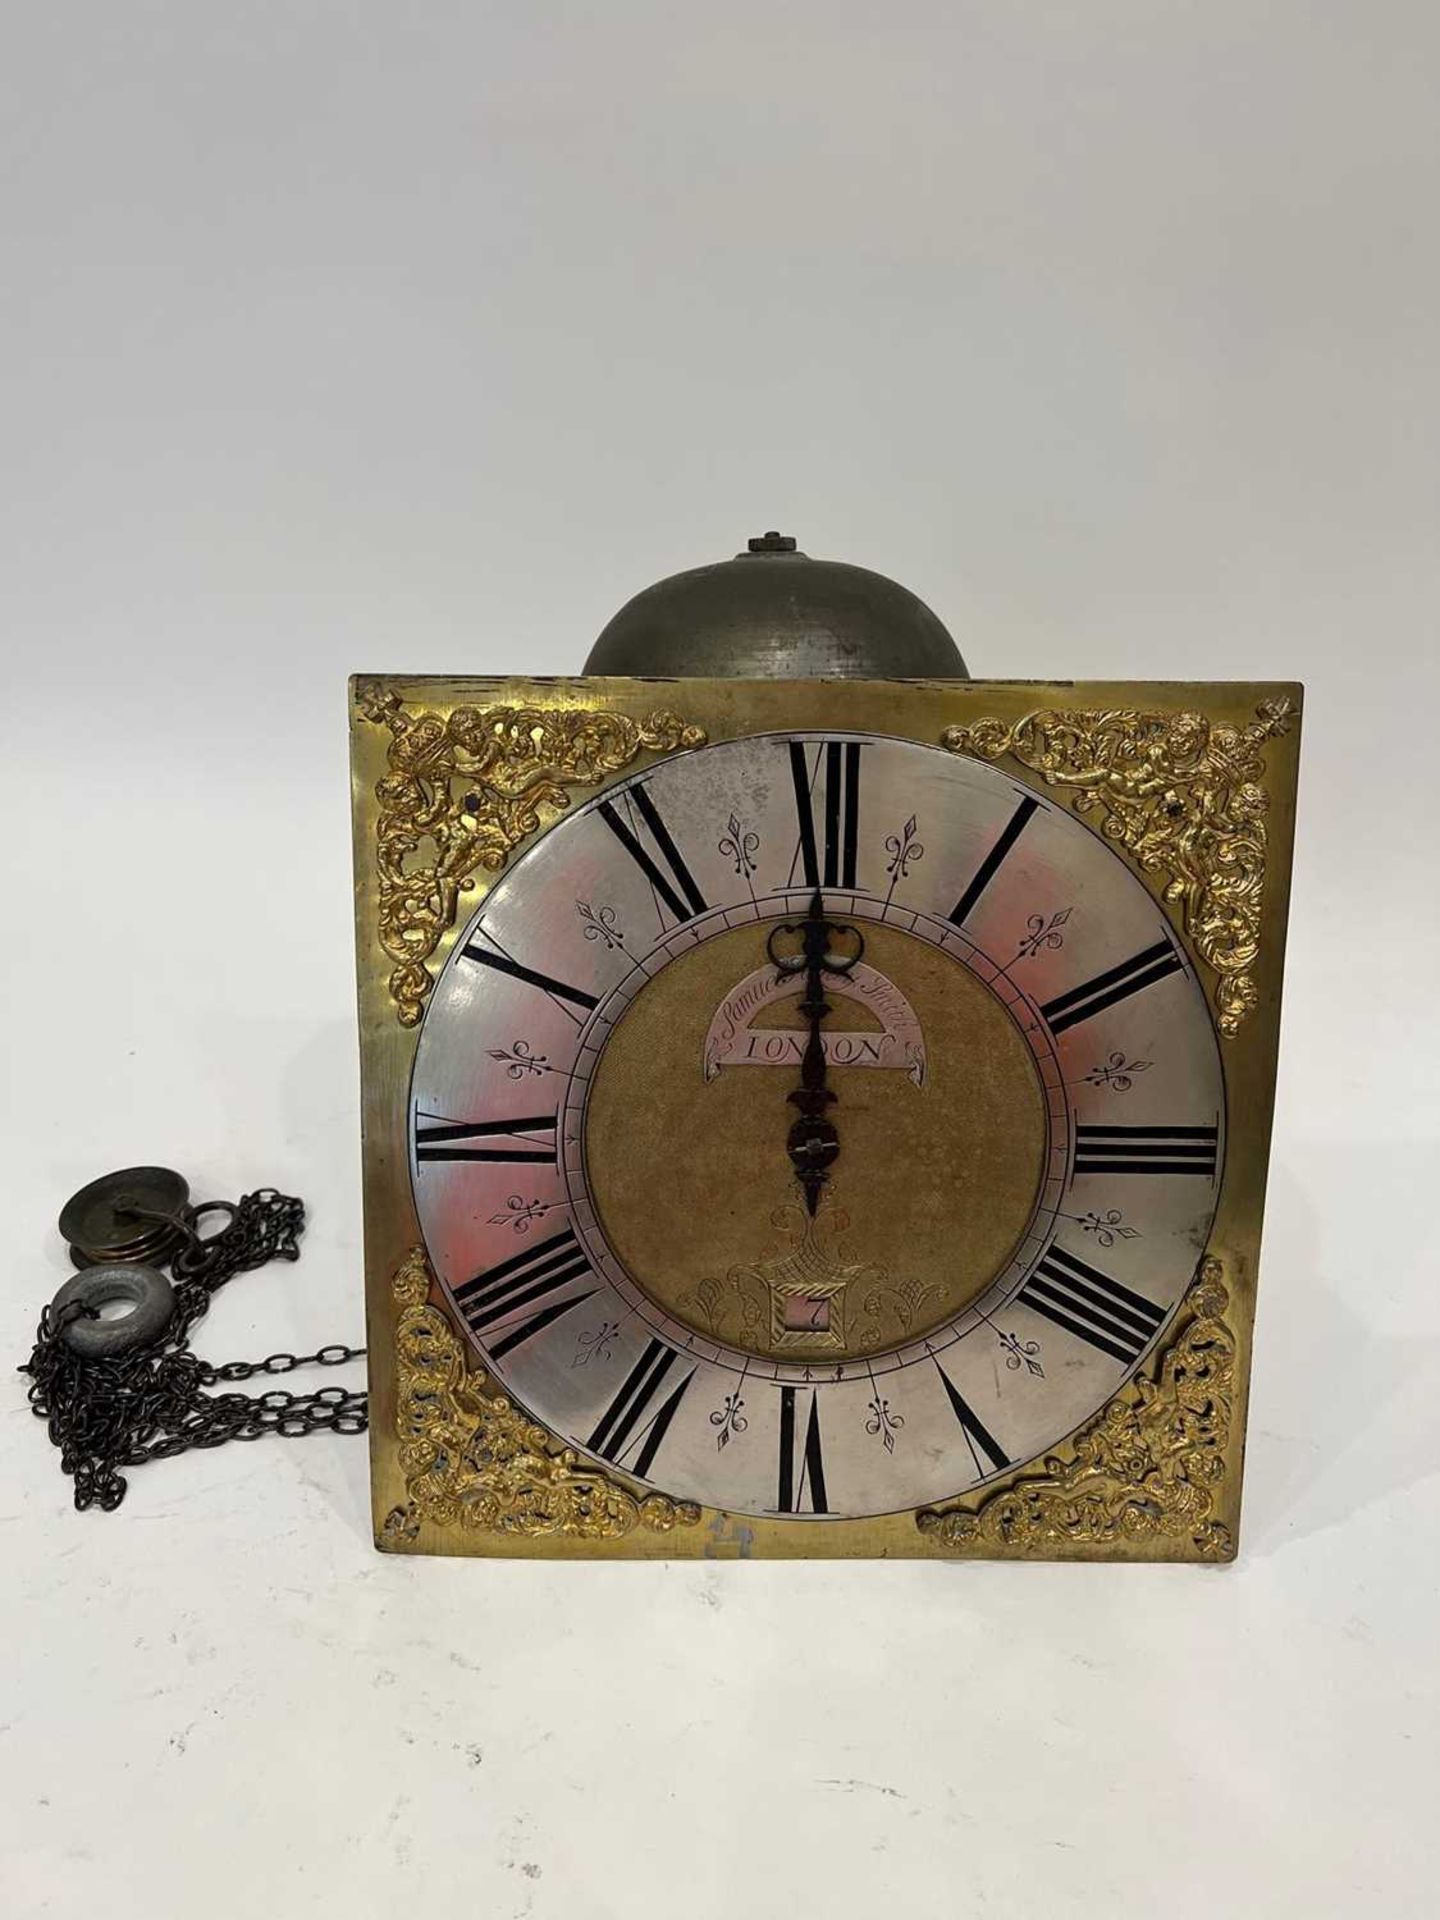 A QUEEN ANNE PERIOD EBONISED LONGCASE CLOCK SIGNED SAMUEL HENRY SMITH, LONDON - Image 10 of 10